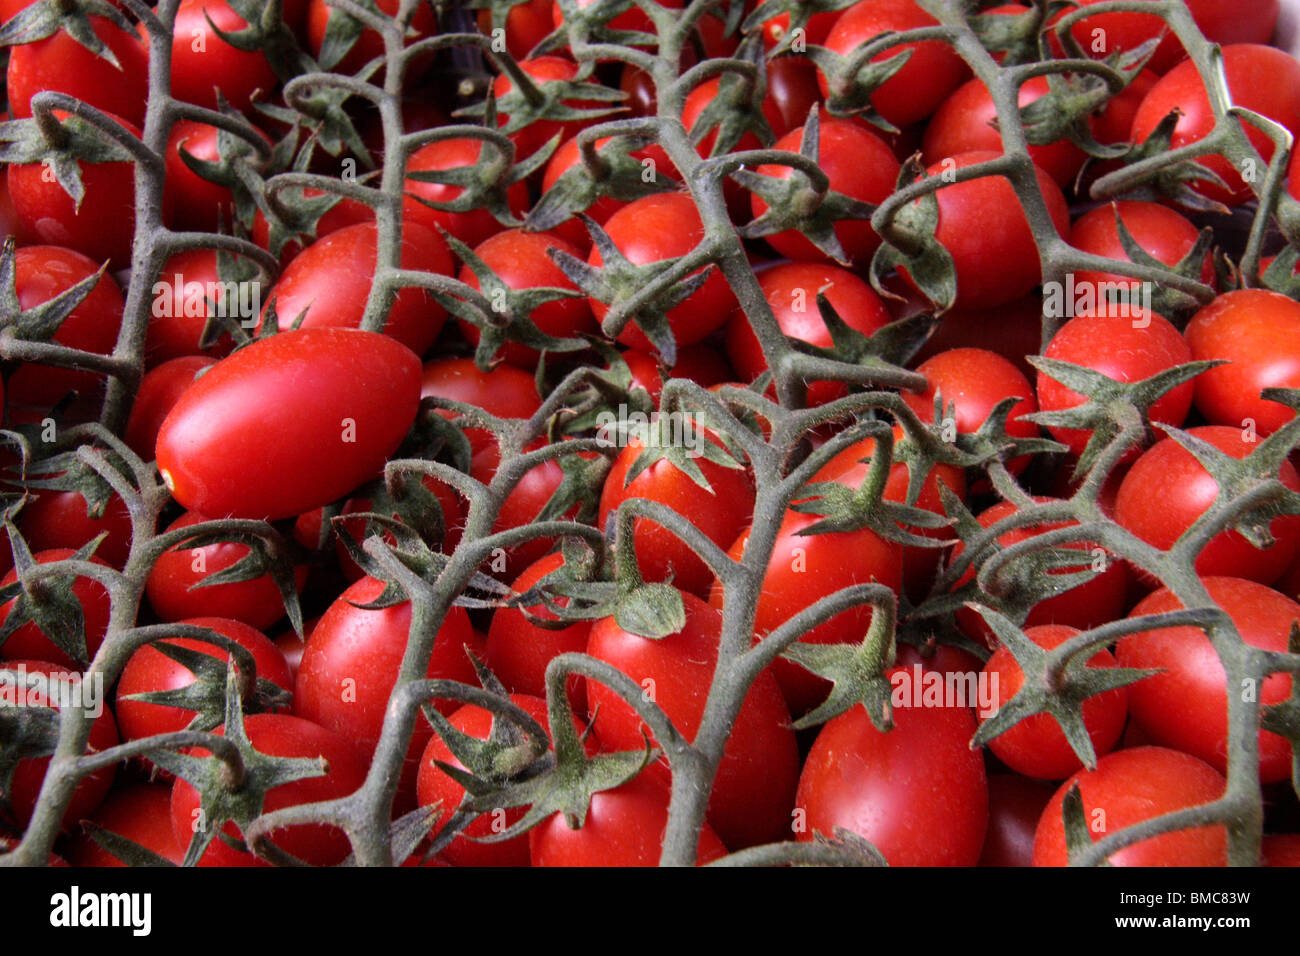 abstract of tomatos displayed for sale in shop from a market Stock Photo